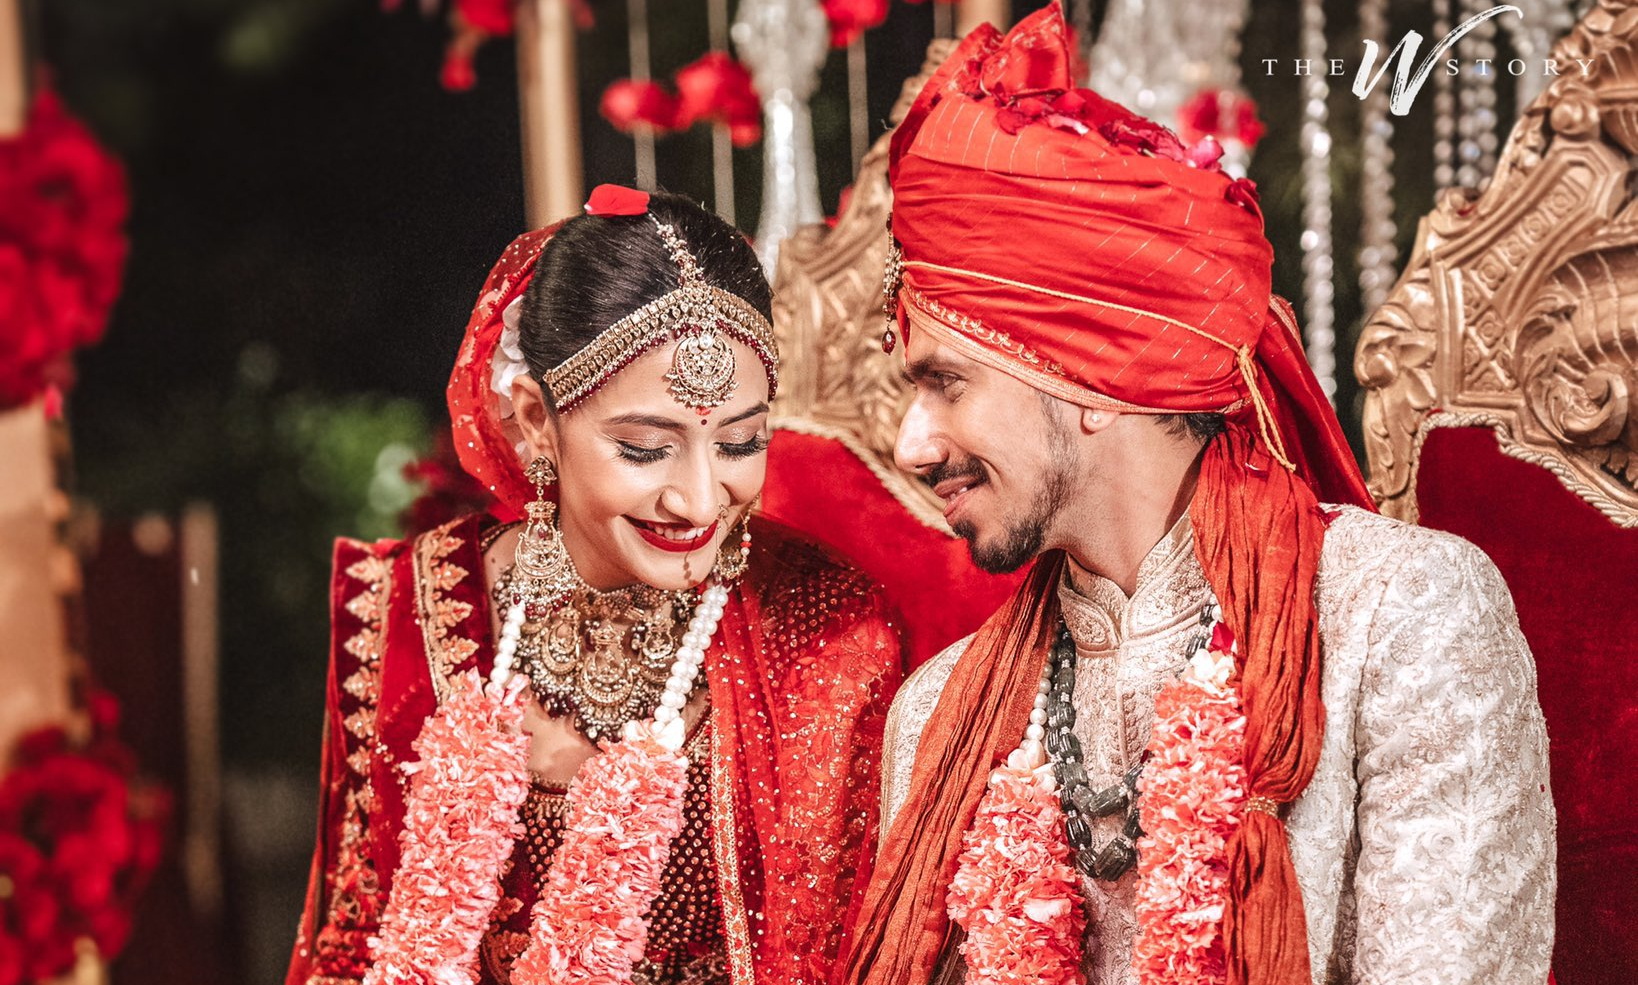 The newly-married couple | Yuzvendra Chahal Twitter